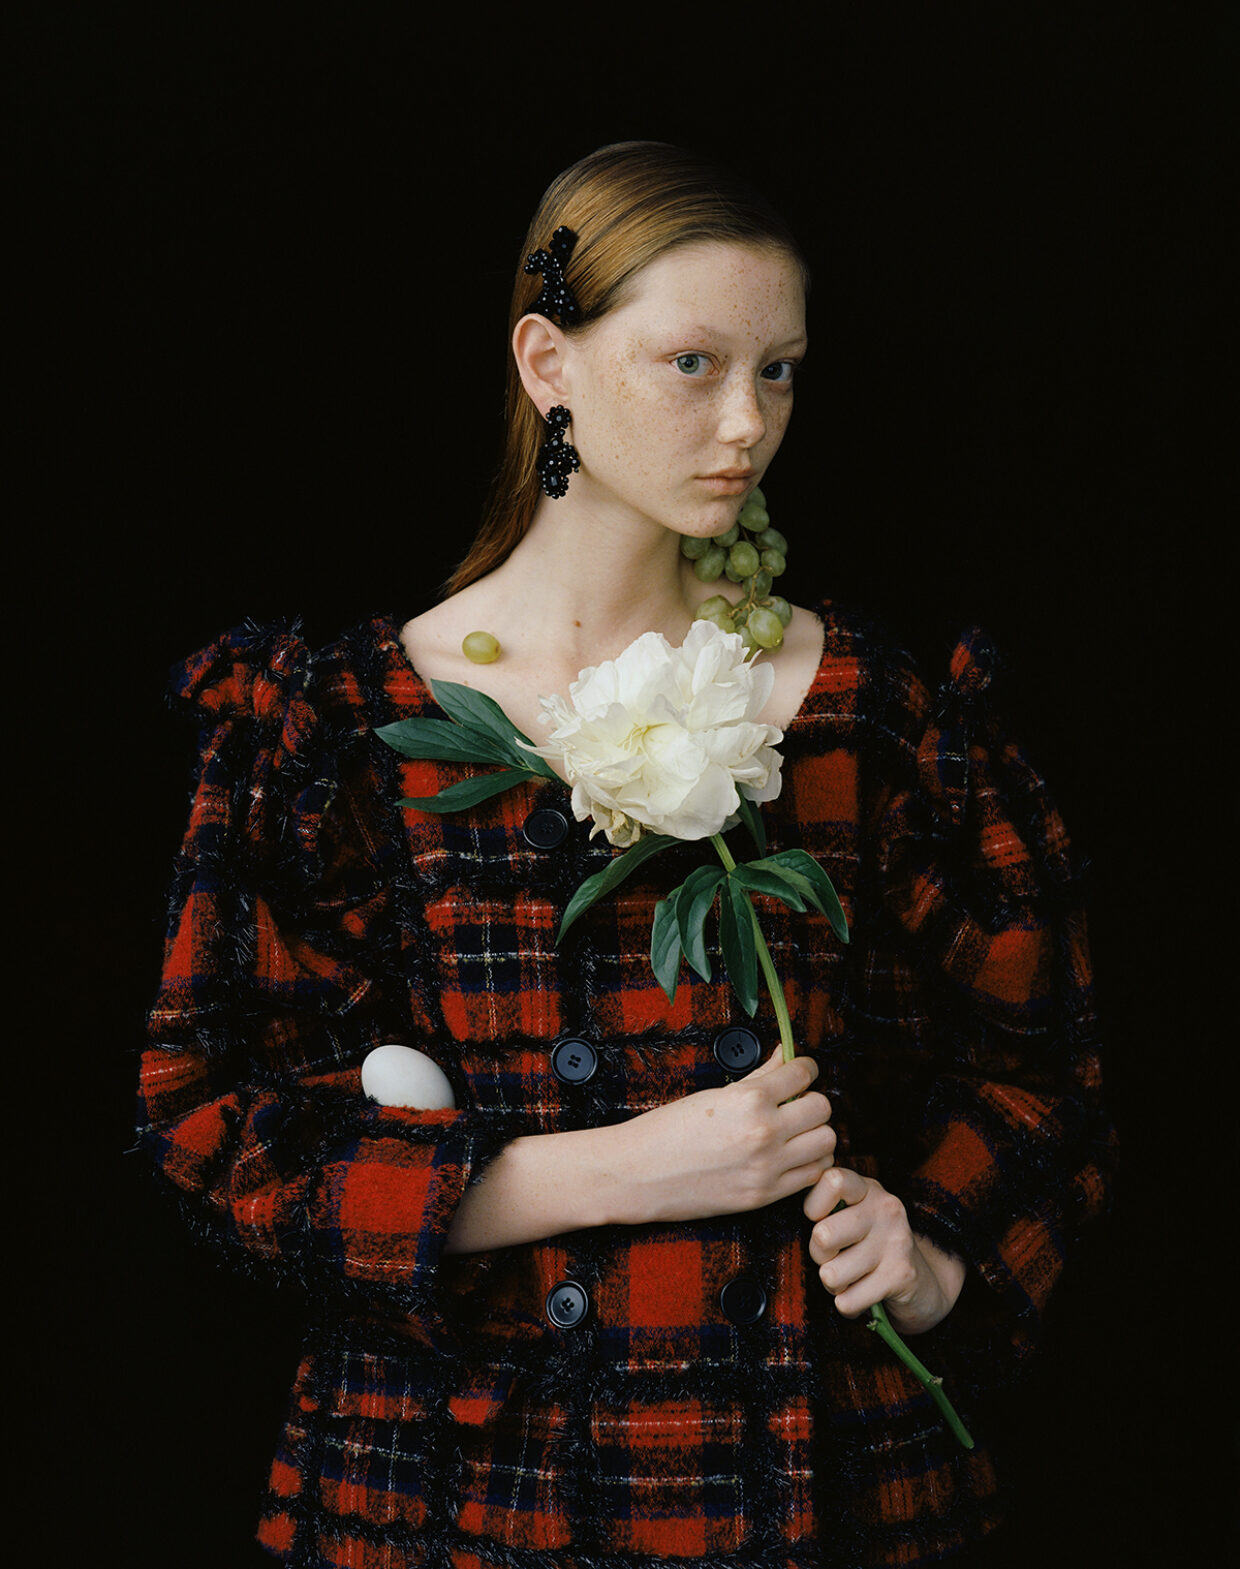 “I Want People to Feel Connected”—Simone Rocha Constructs a Beautiful, Universal World | 4